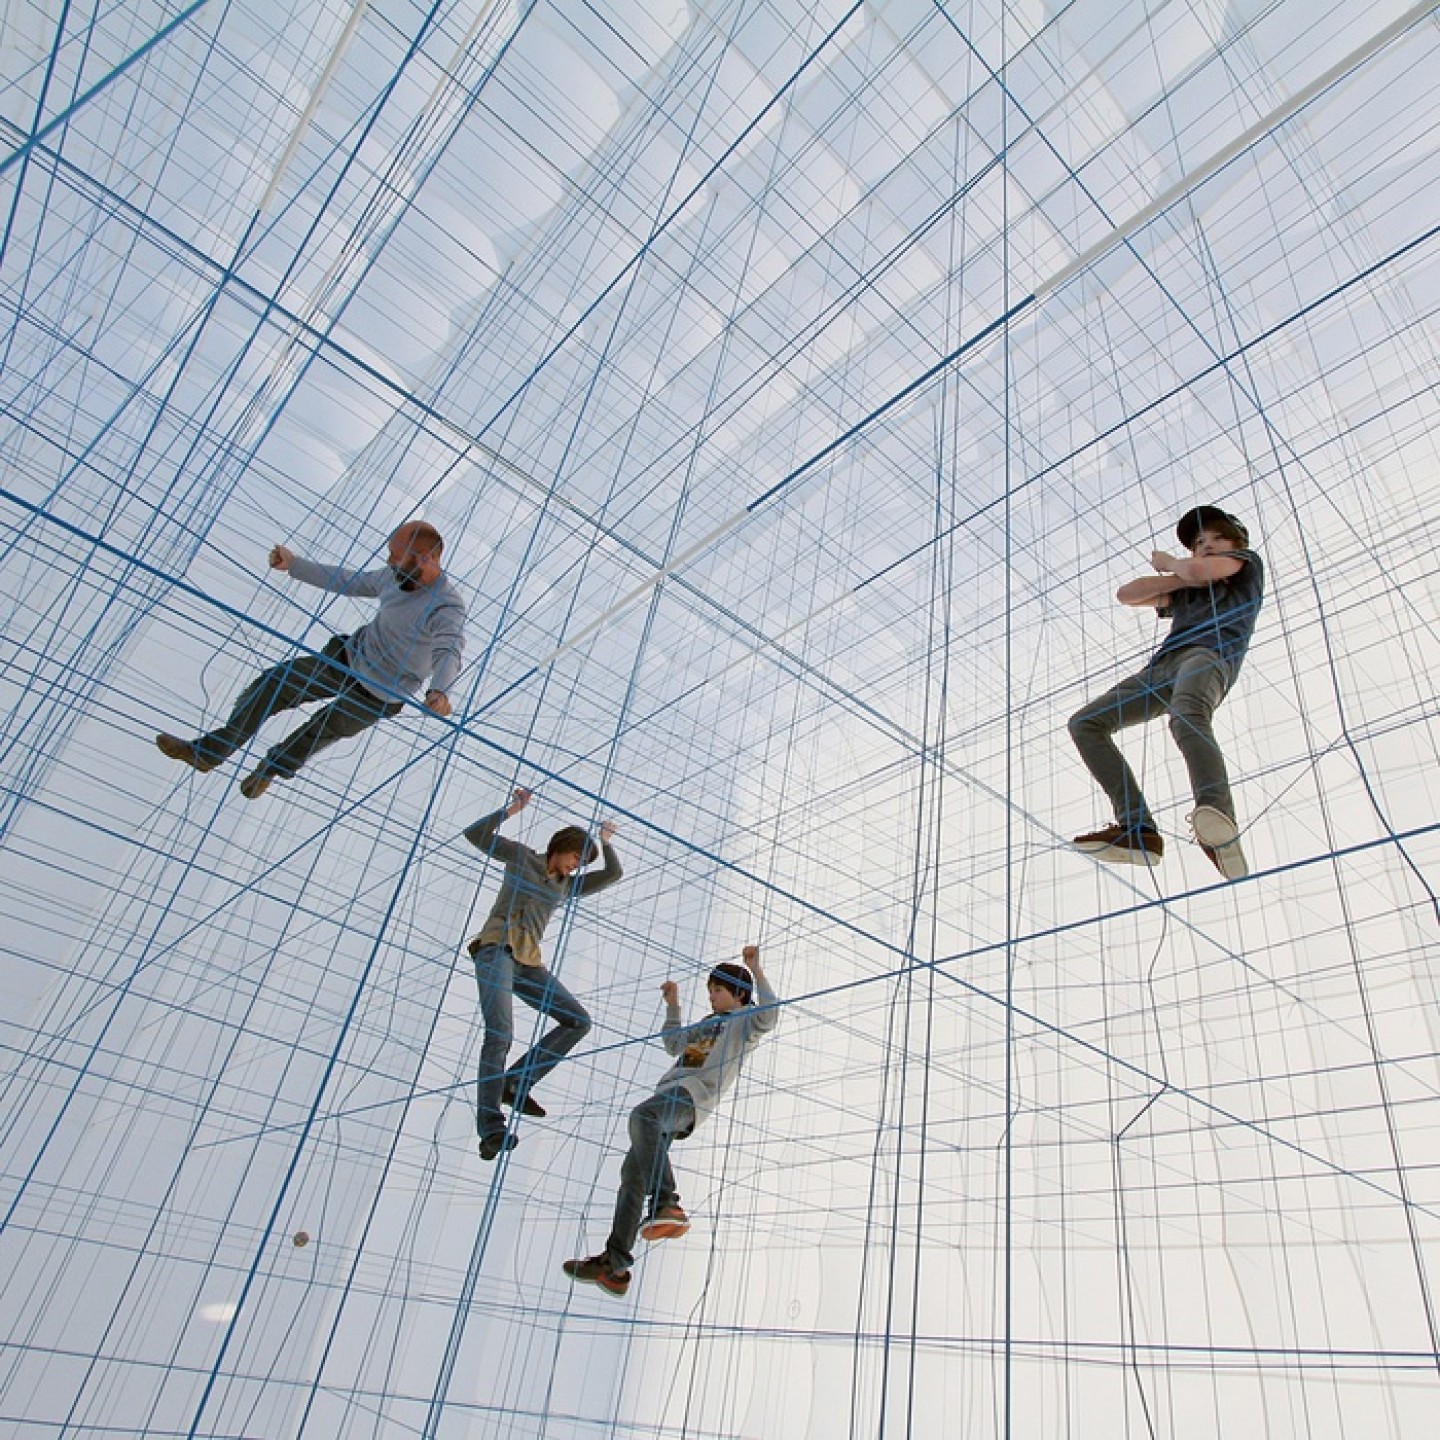 String Vienna, 2014 – © Numen / For Use